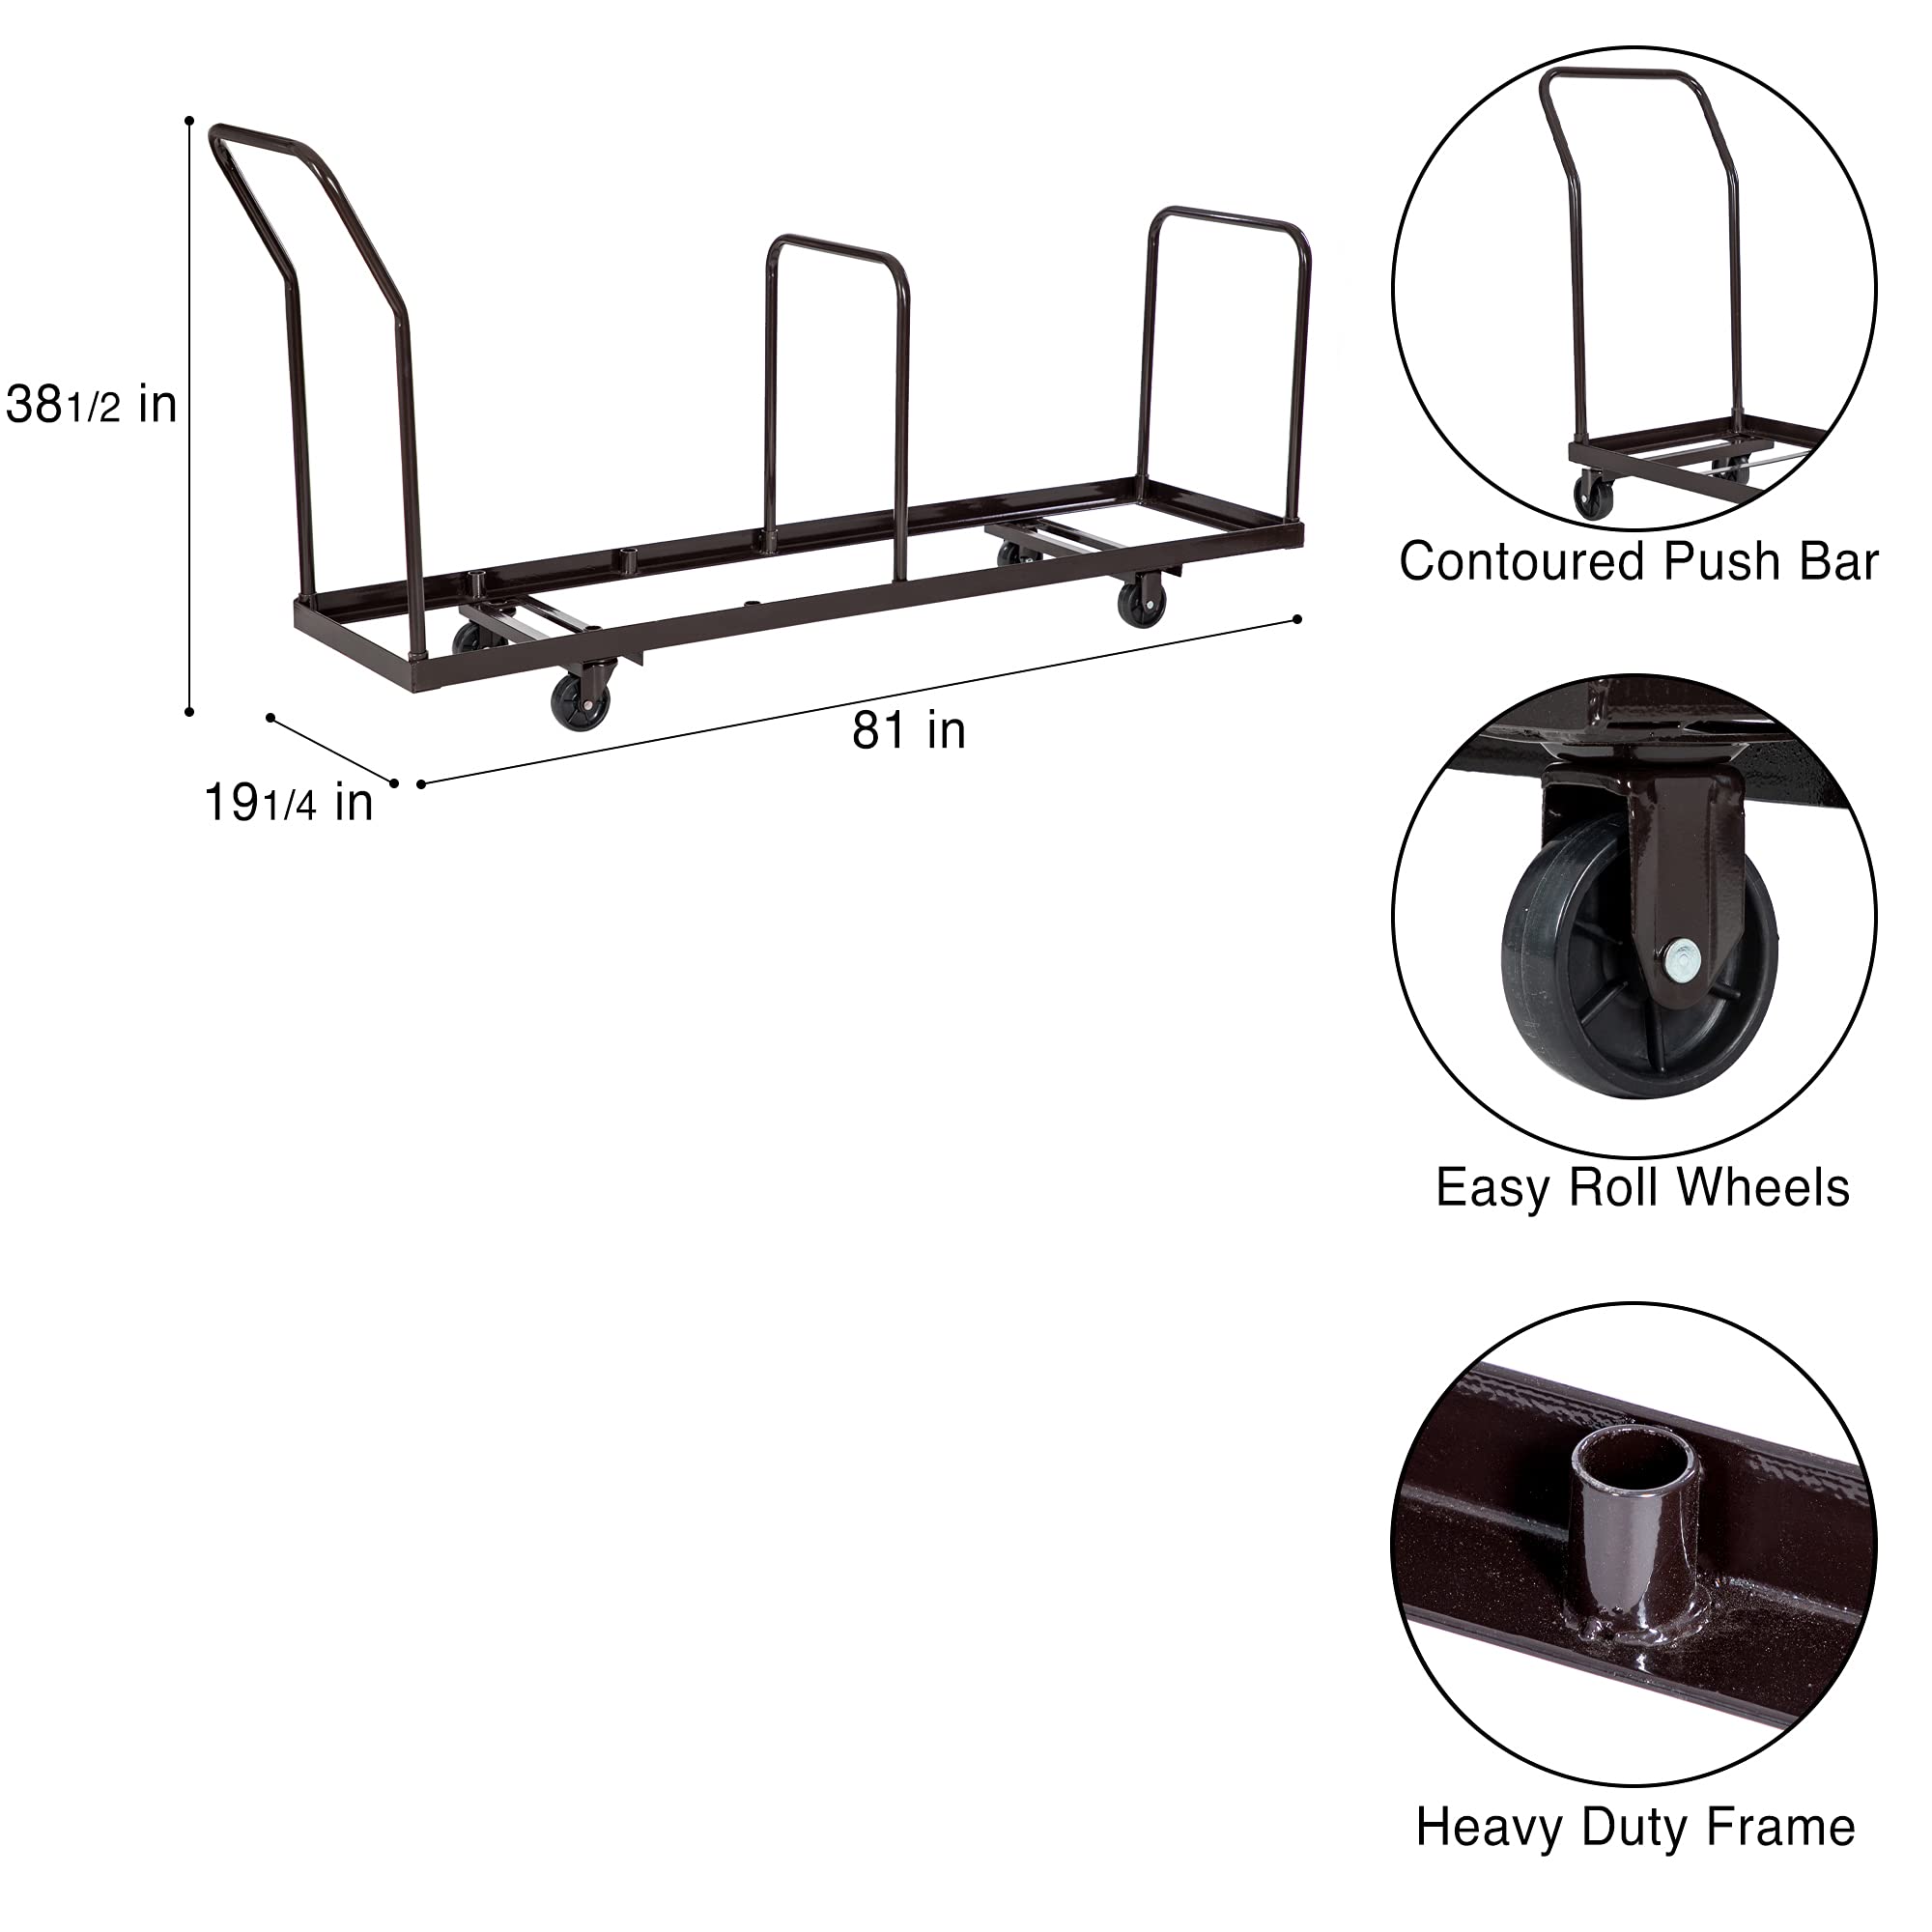 OEF Furnishings Folding Chair Dolly. Stores and Transports Chairs Measuring 15.25"-19"Width, 35 Chair Capacity